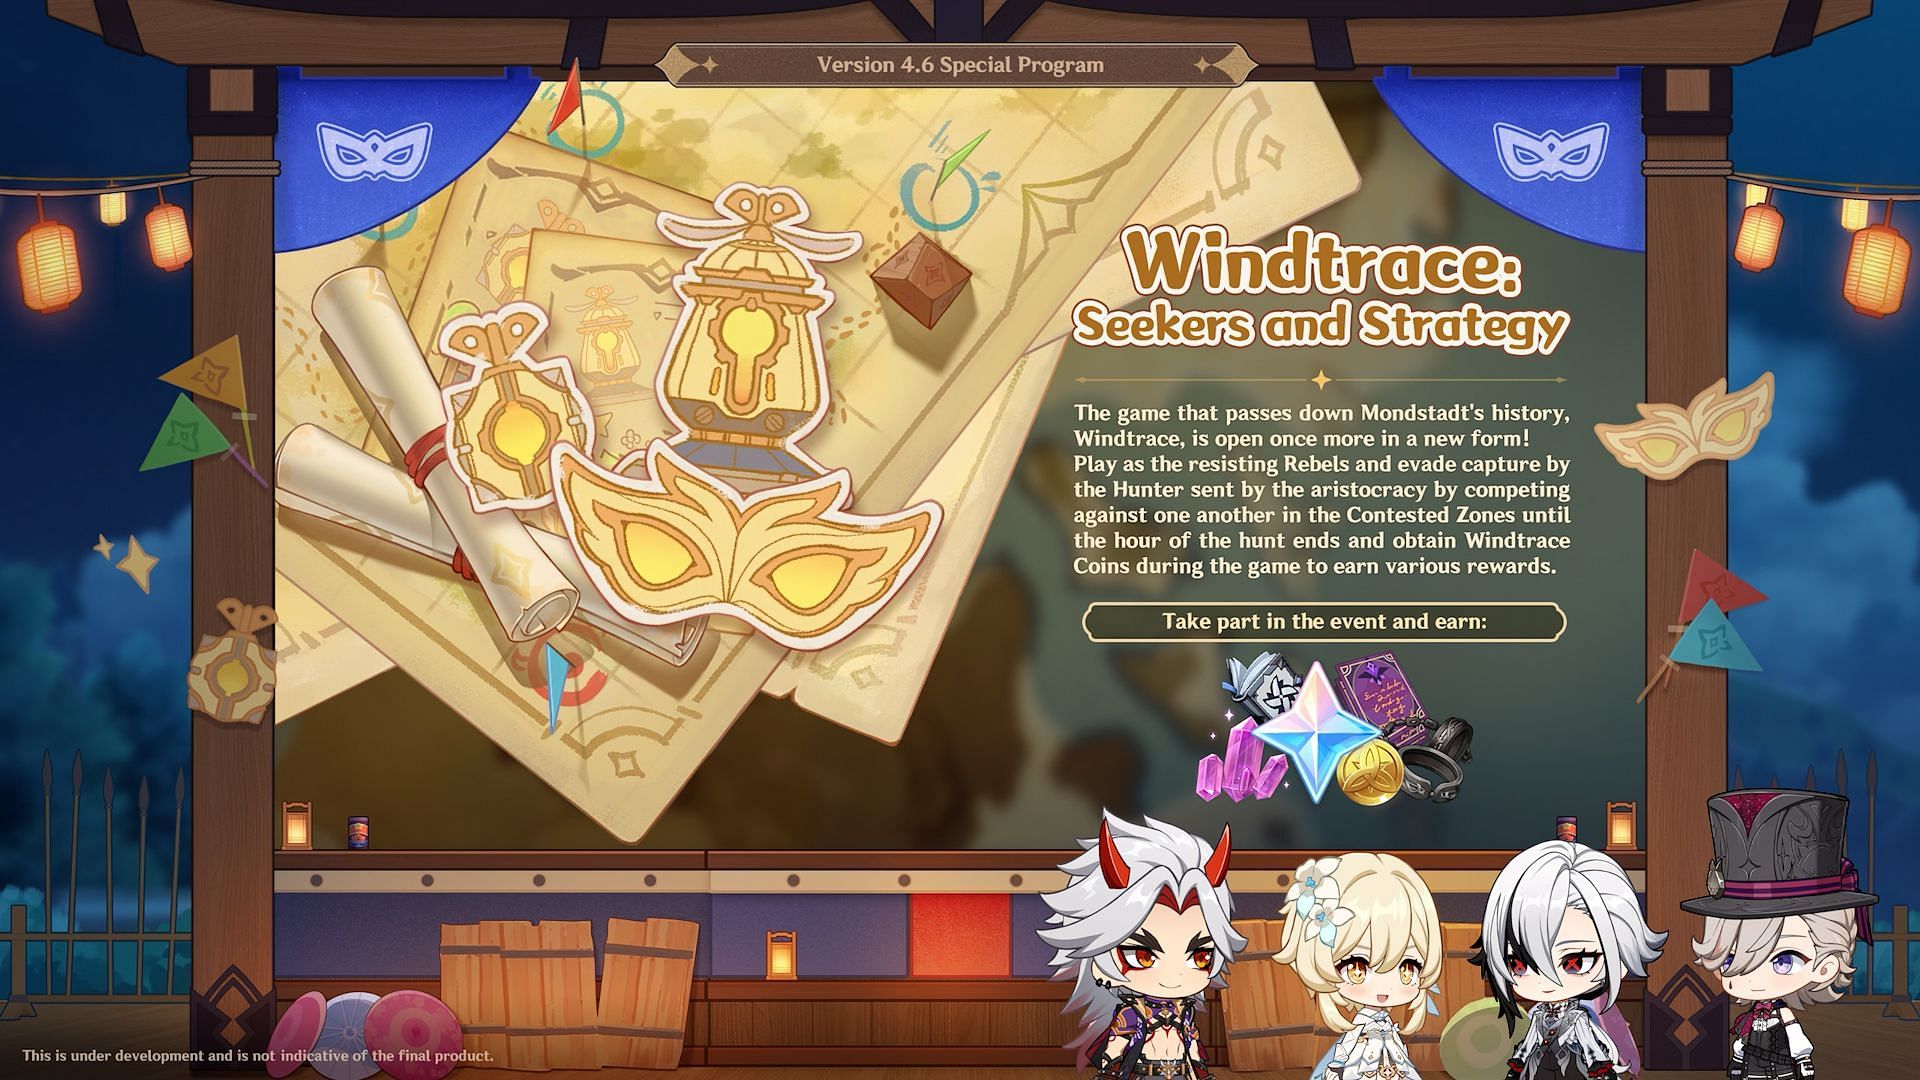 The Windtrace event is back (Image via HoYoverse)